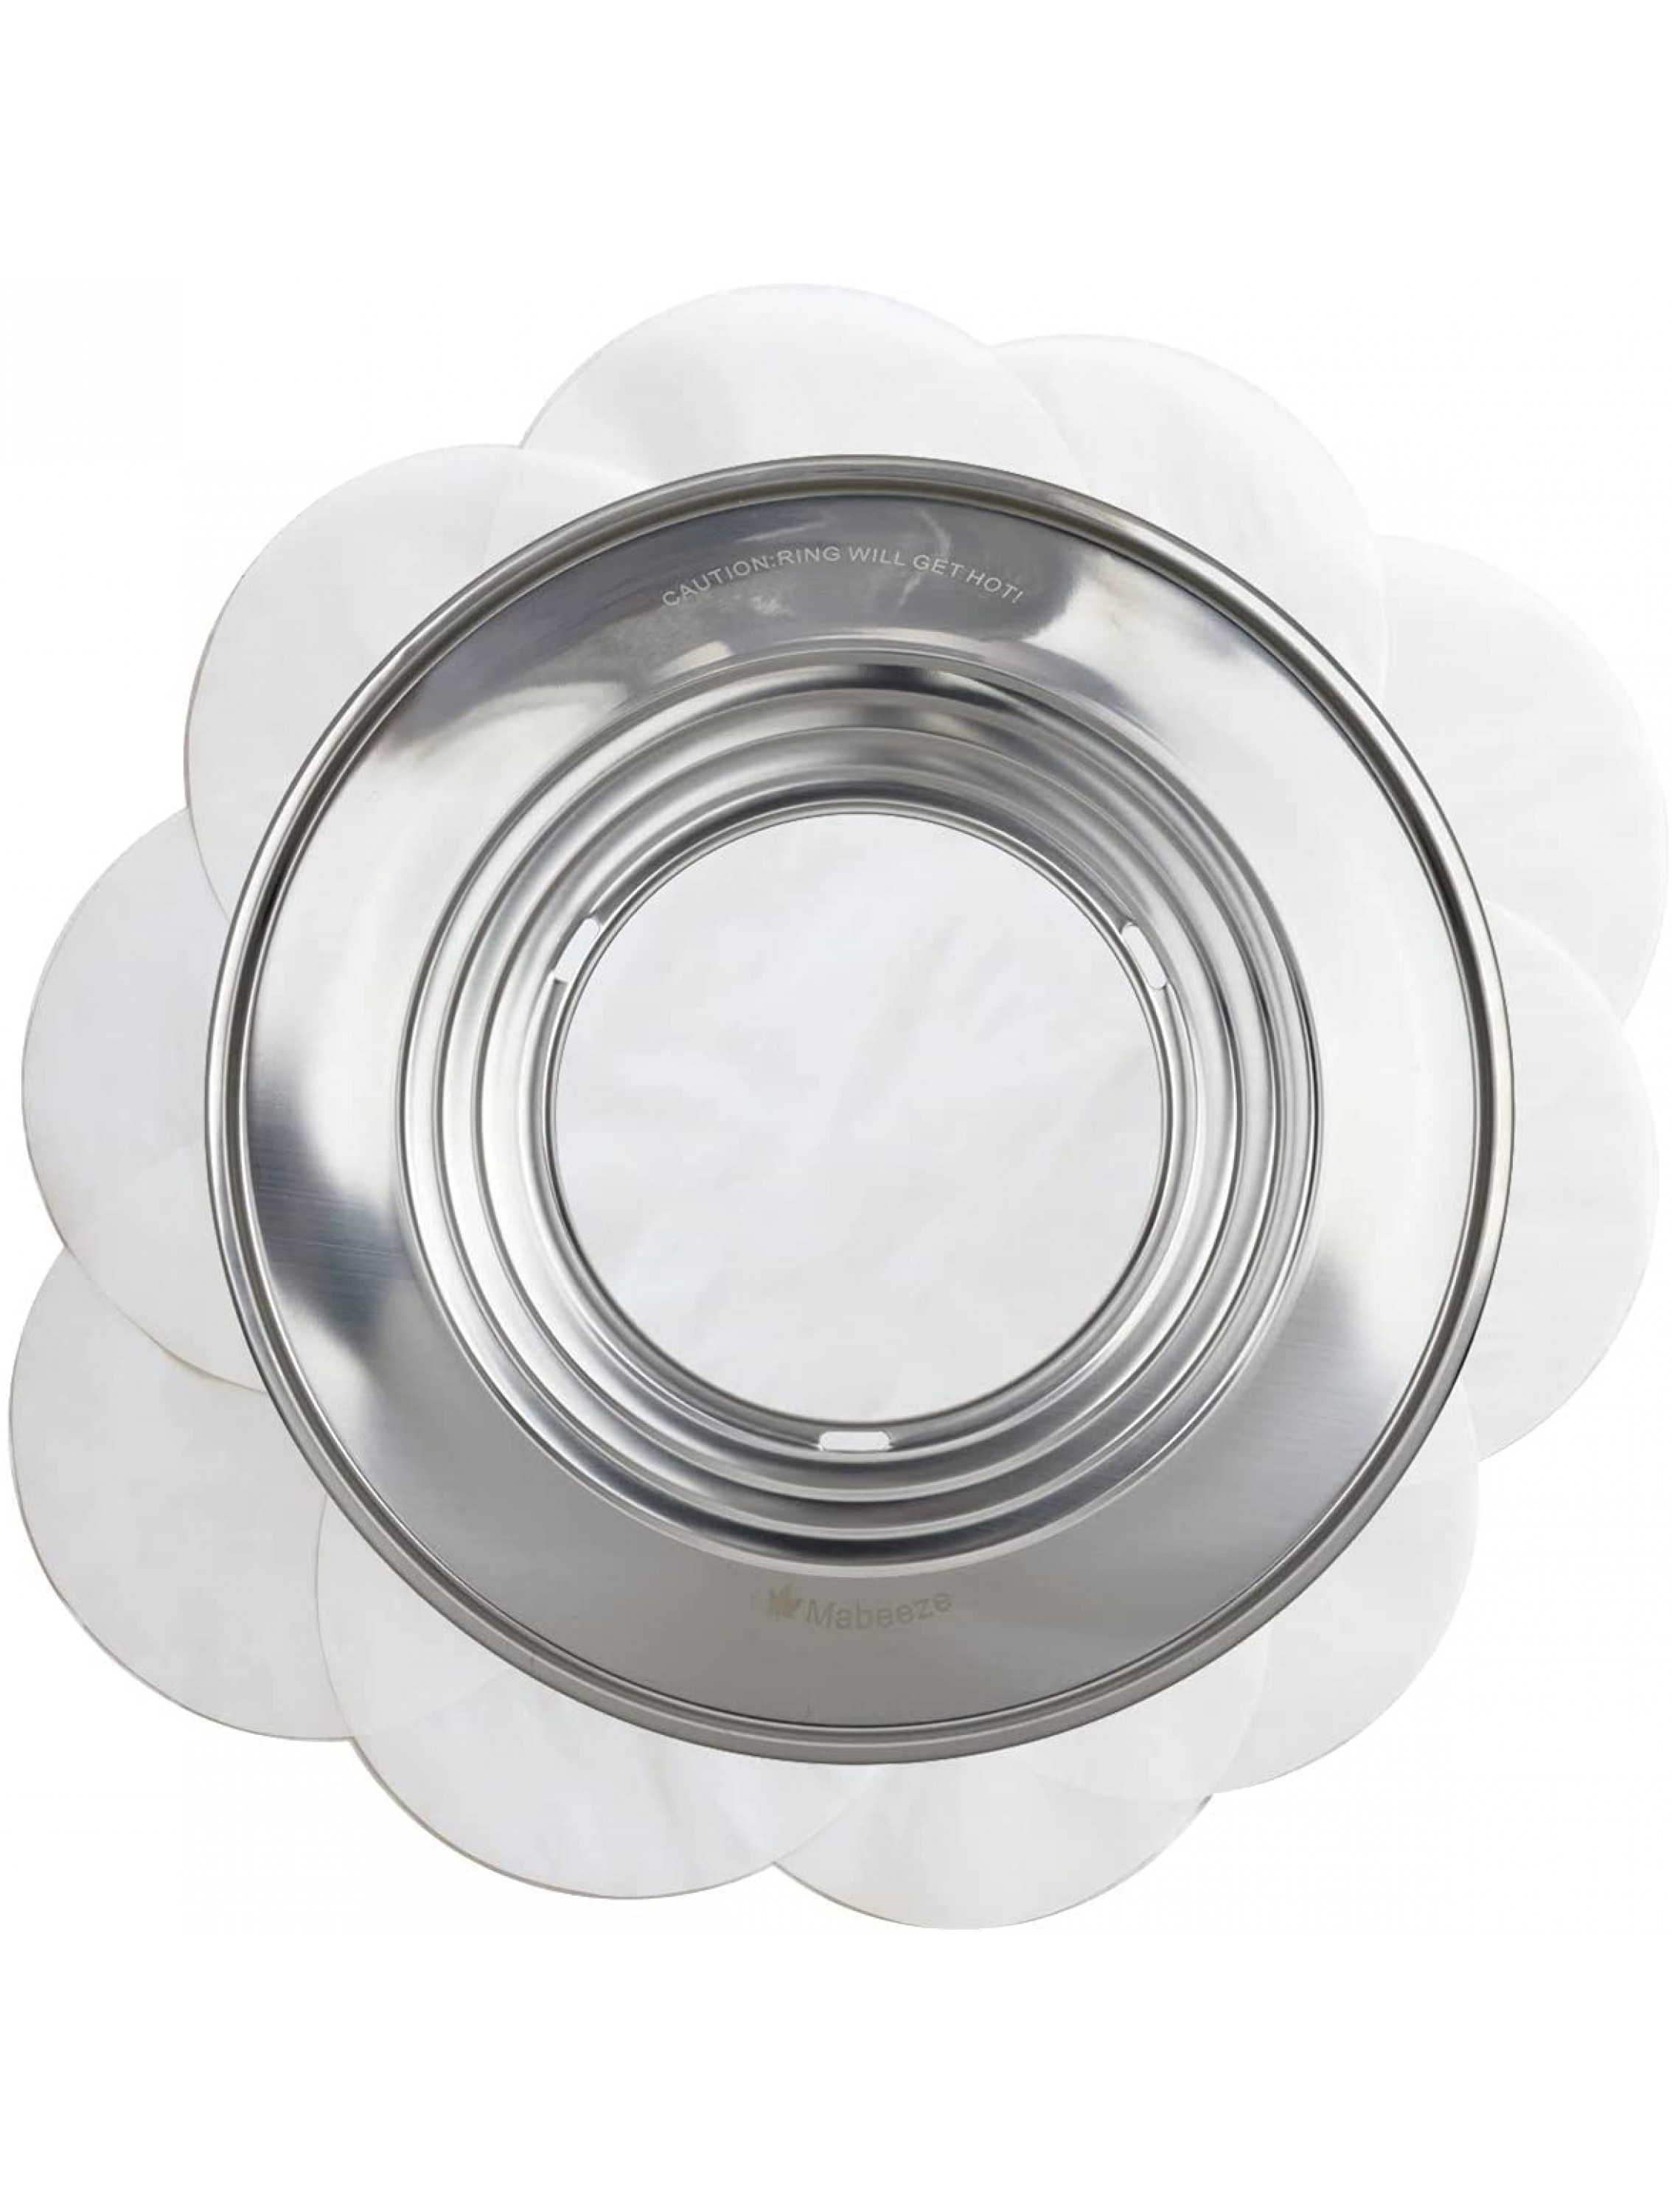 Mabeeze Steamer Ring Stainless Steel Adapter fits 8 to 13 inches Steamers and Pots for Bamboo Baskets and Steamer Pots 10 Paper Liners included - BF17TQF1R